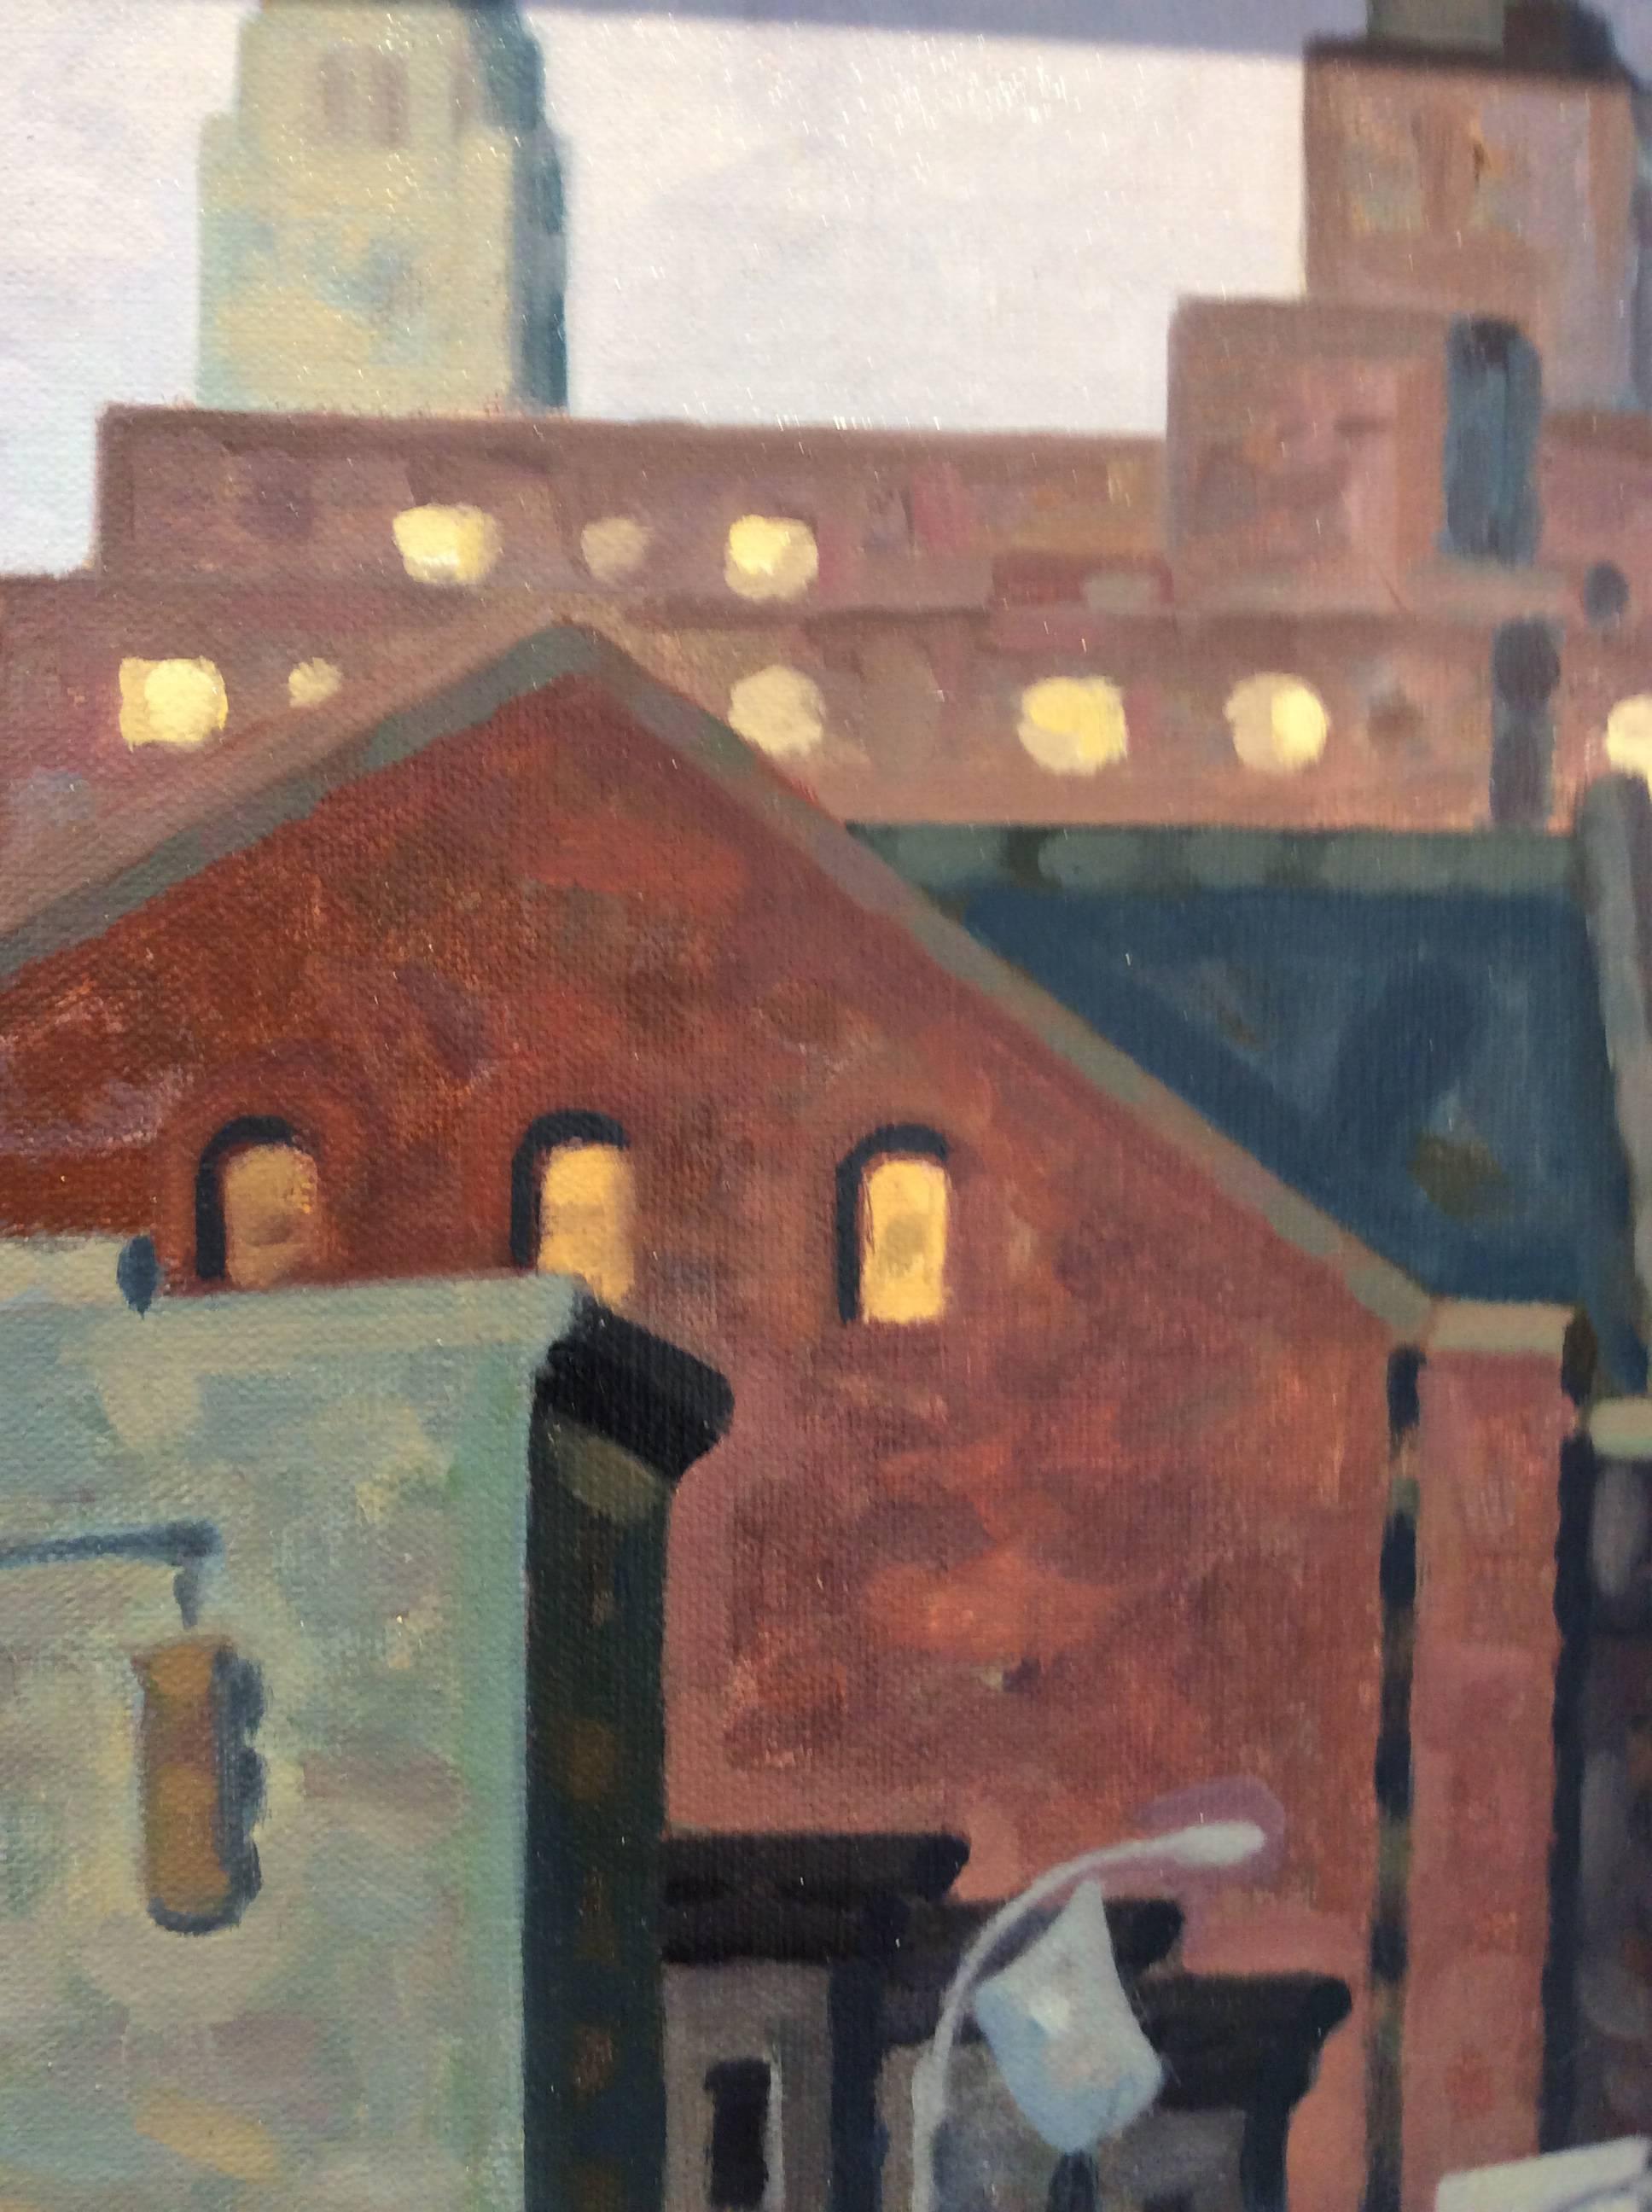 oil on linen board
10 x 8
12.5 x 10.5 inches framed

This small 10 x 20 inch cityscape oil painting on canvas board in a black frame was painted by Robert Goldstrom in 2017. The scene is of the Brooklyn, NY skyline in the very early hours of the